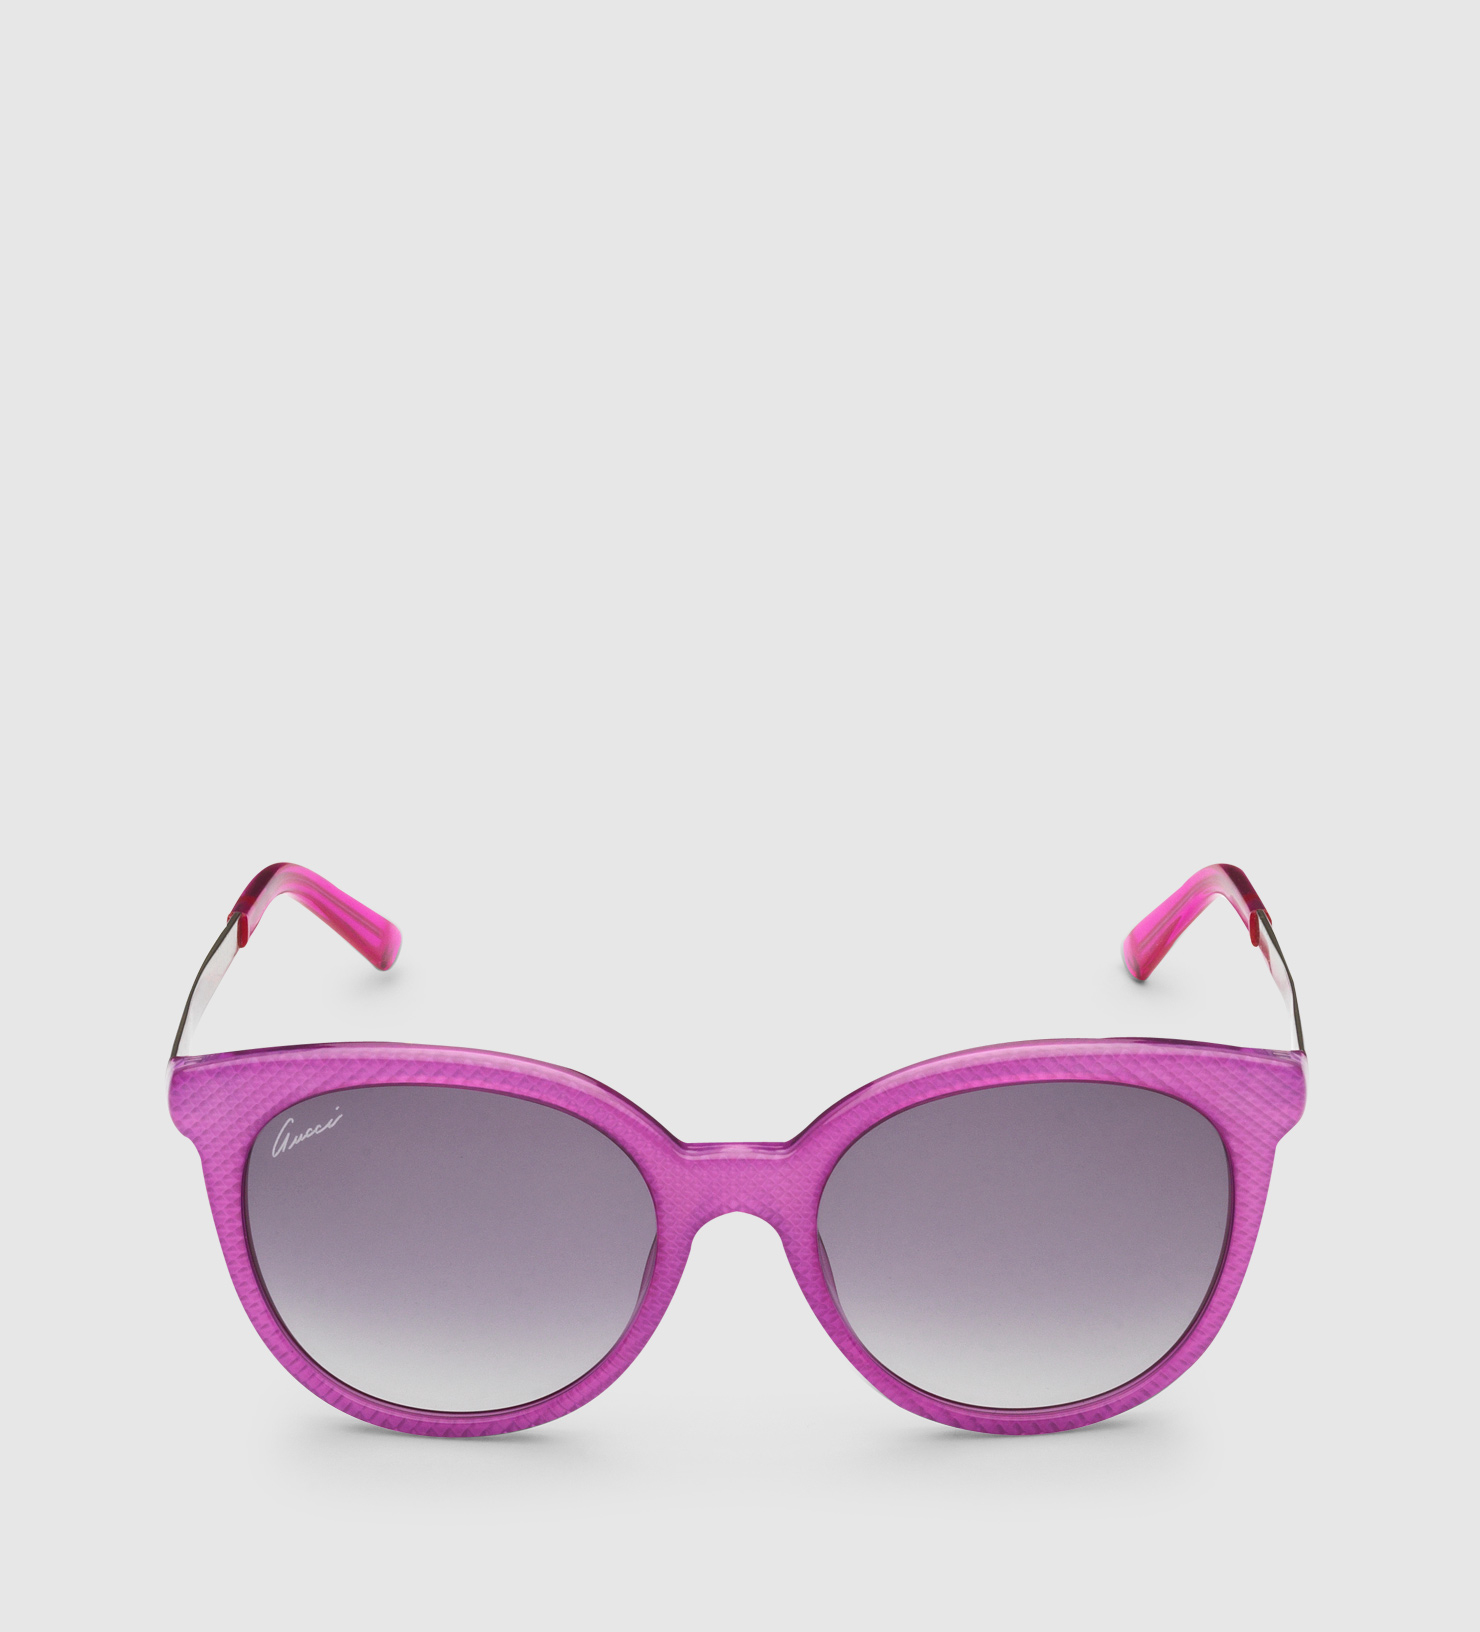 Lyst - Gucci Fuchsia Round Shape Embossed Sunglasses in Pink